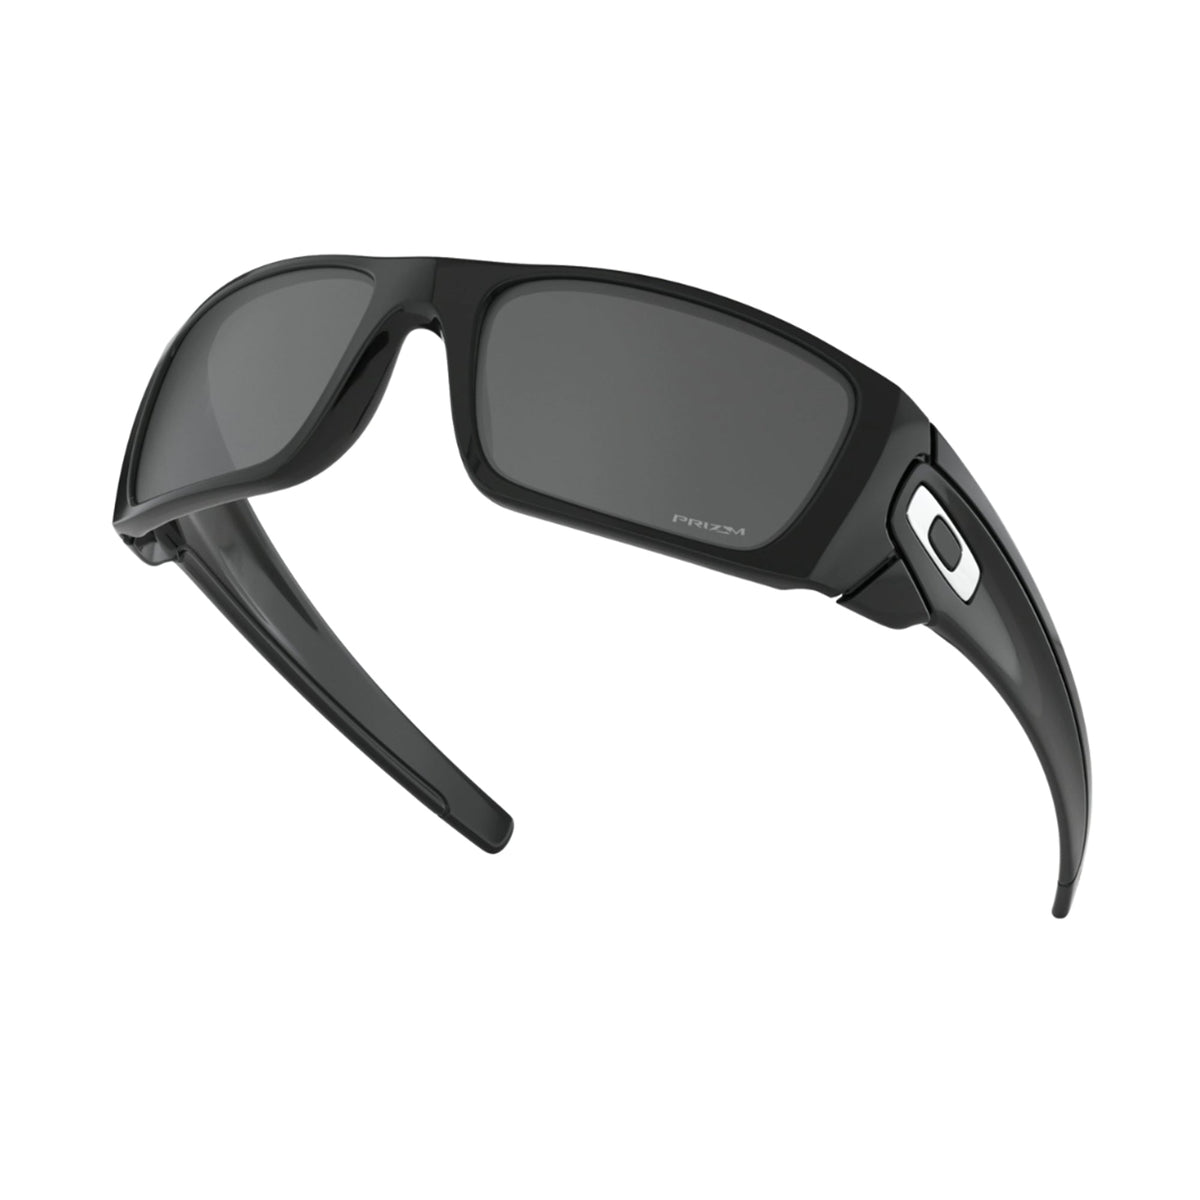 Oakley OO9096-J560 Fuel Cell Sunglasses Polished Black with Prizm Black Lens